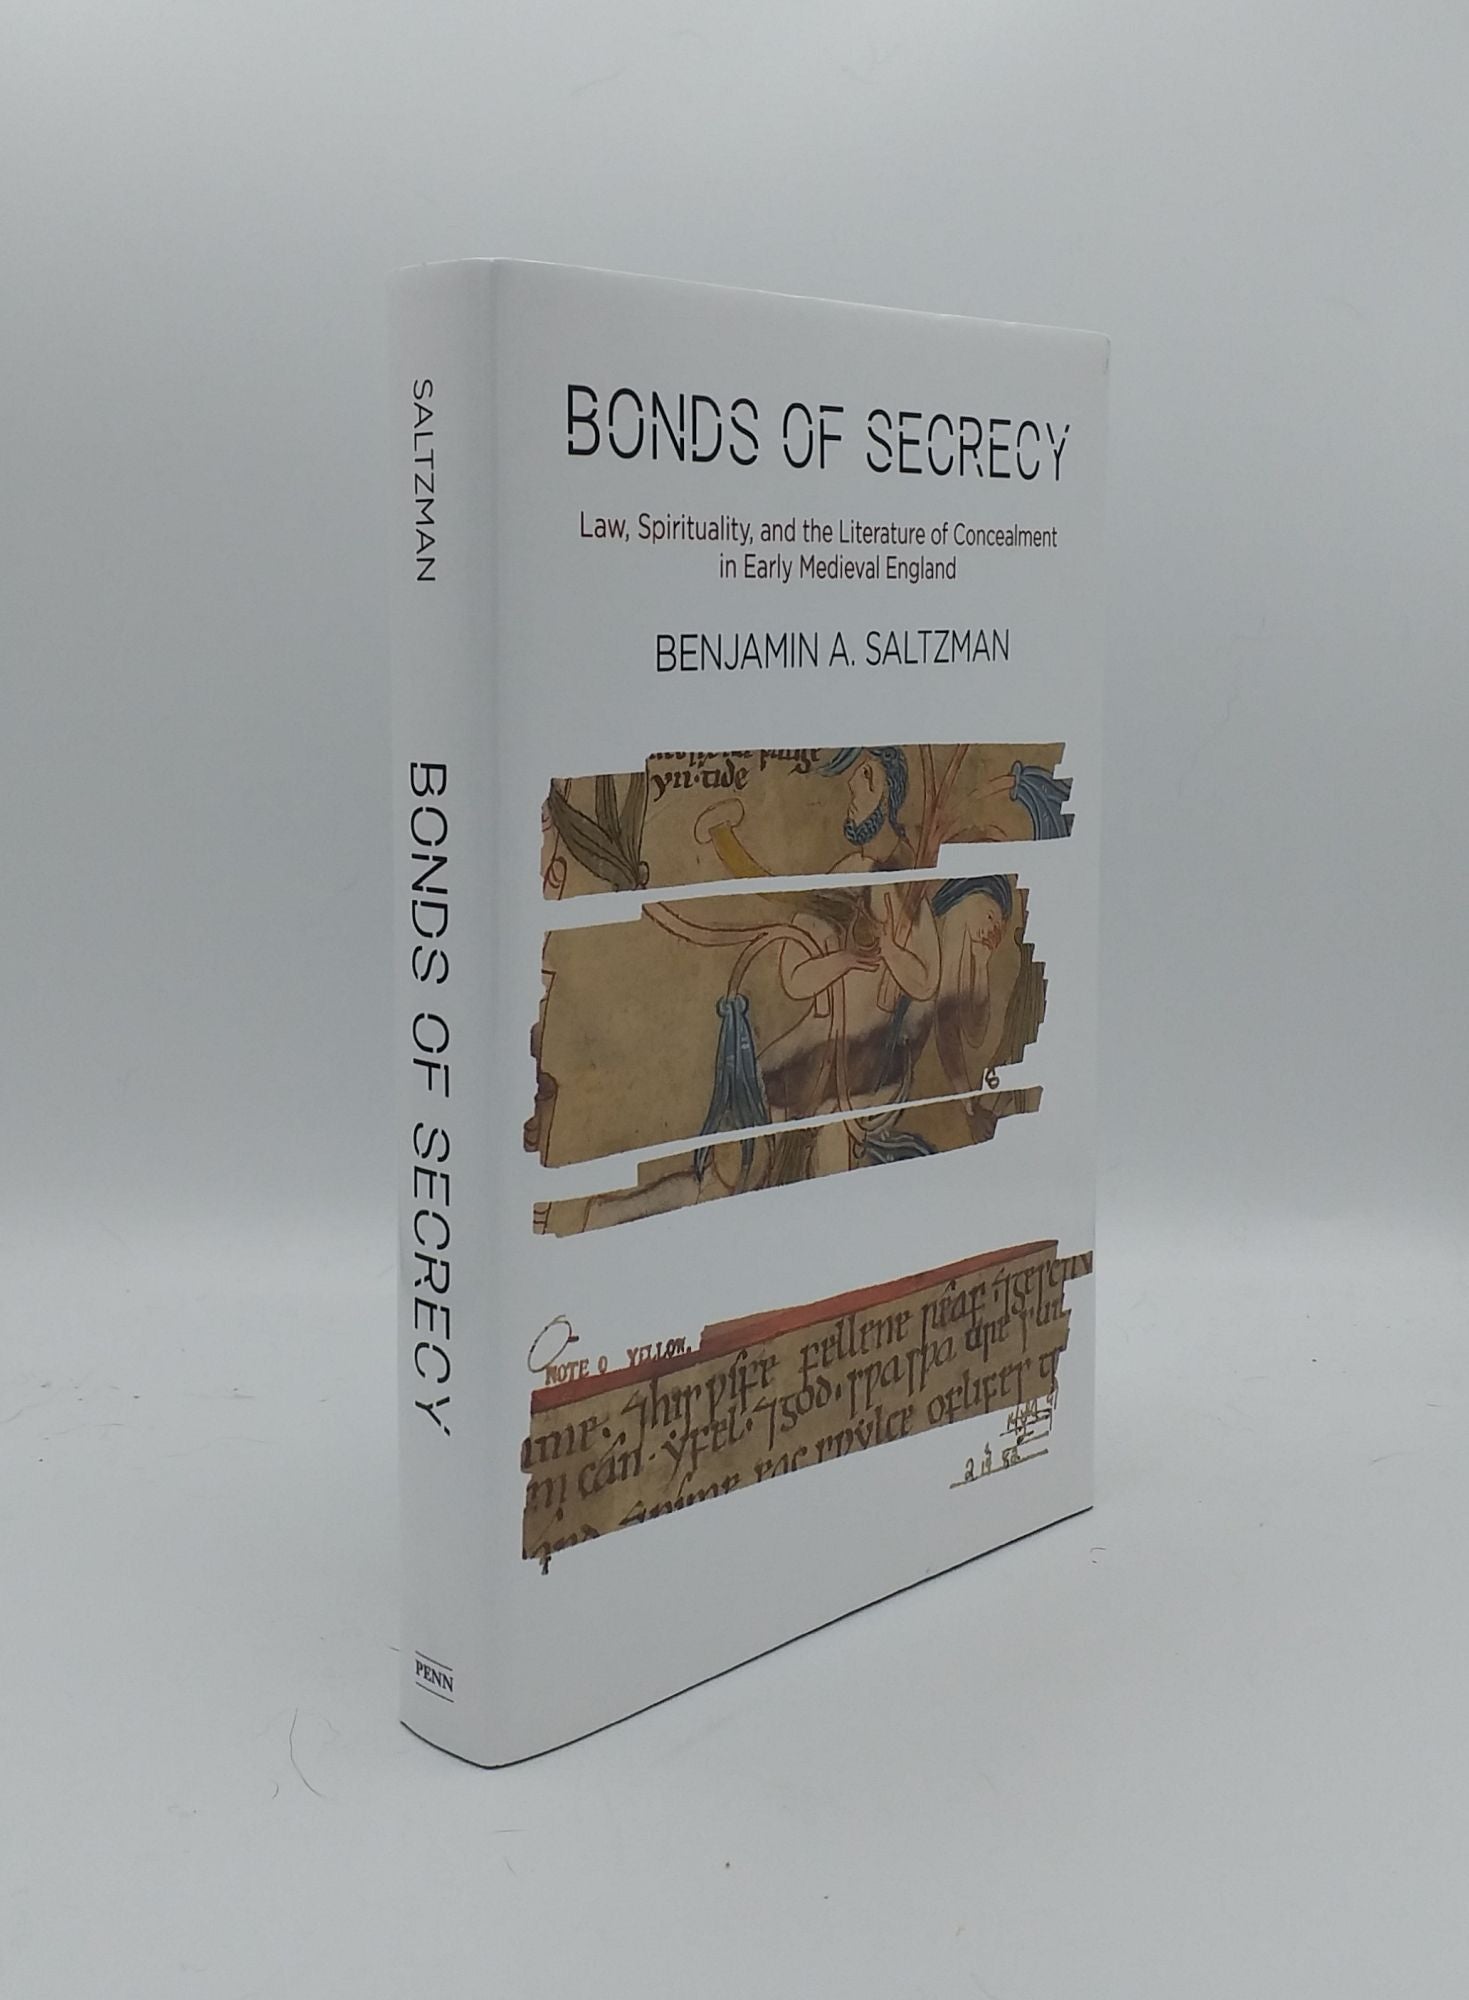 SALTZMAN Benjamin A. - Bonds of Secrecy Law Spirituality and the Literature of Concealment in Early Medieval England